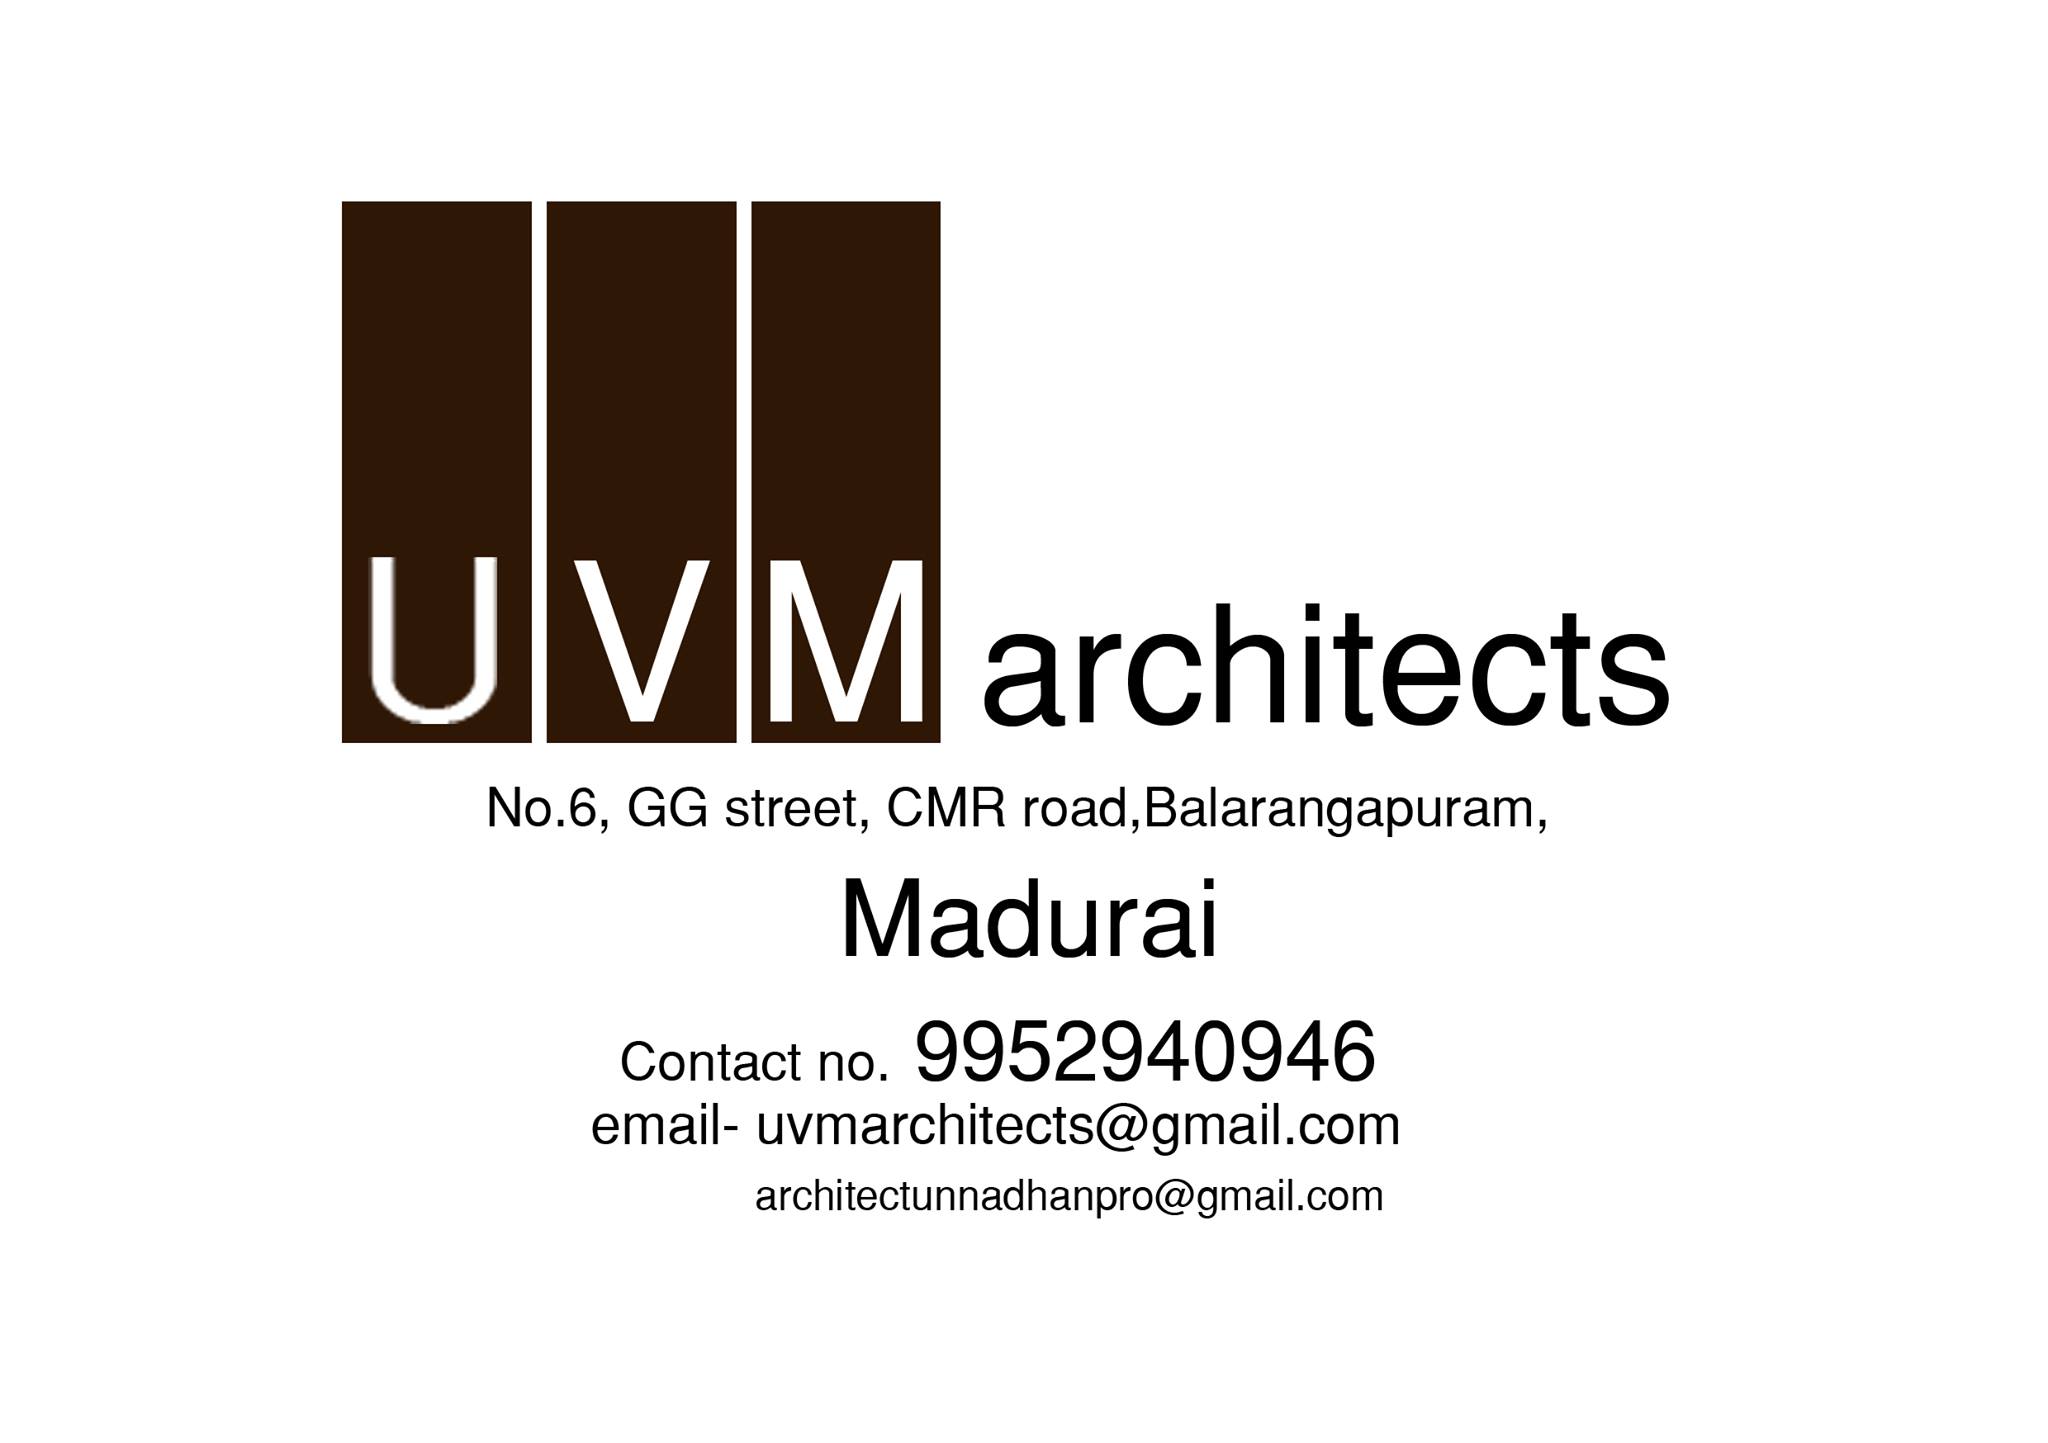 UVM Architects|Legal Services|Professional Services